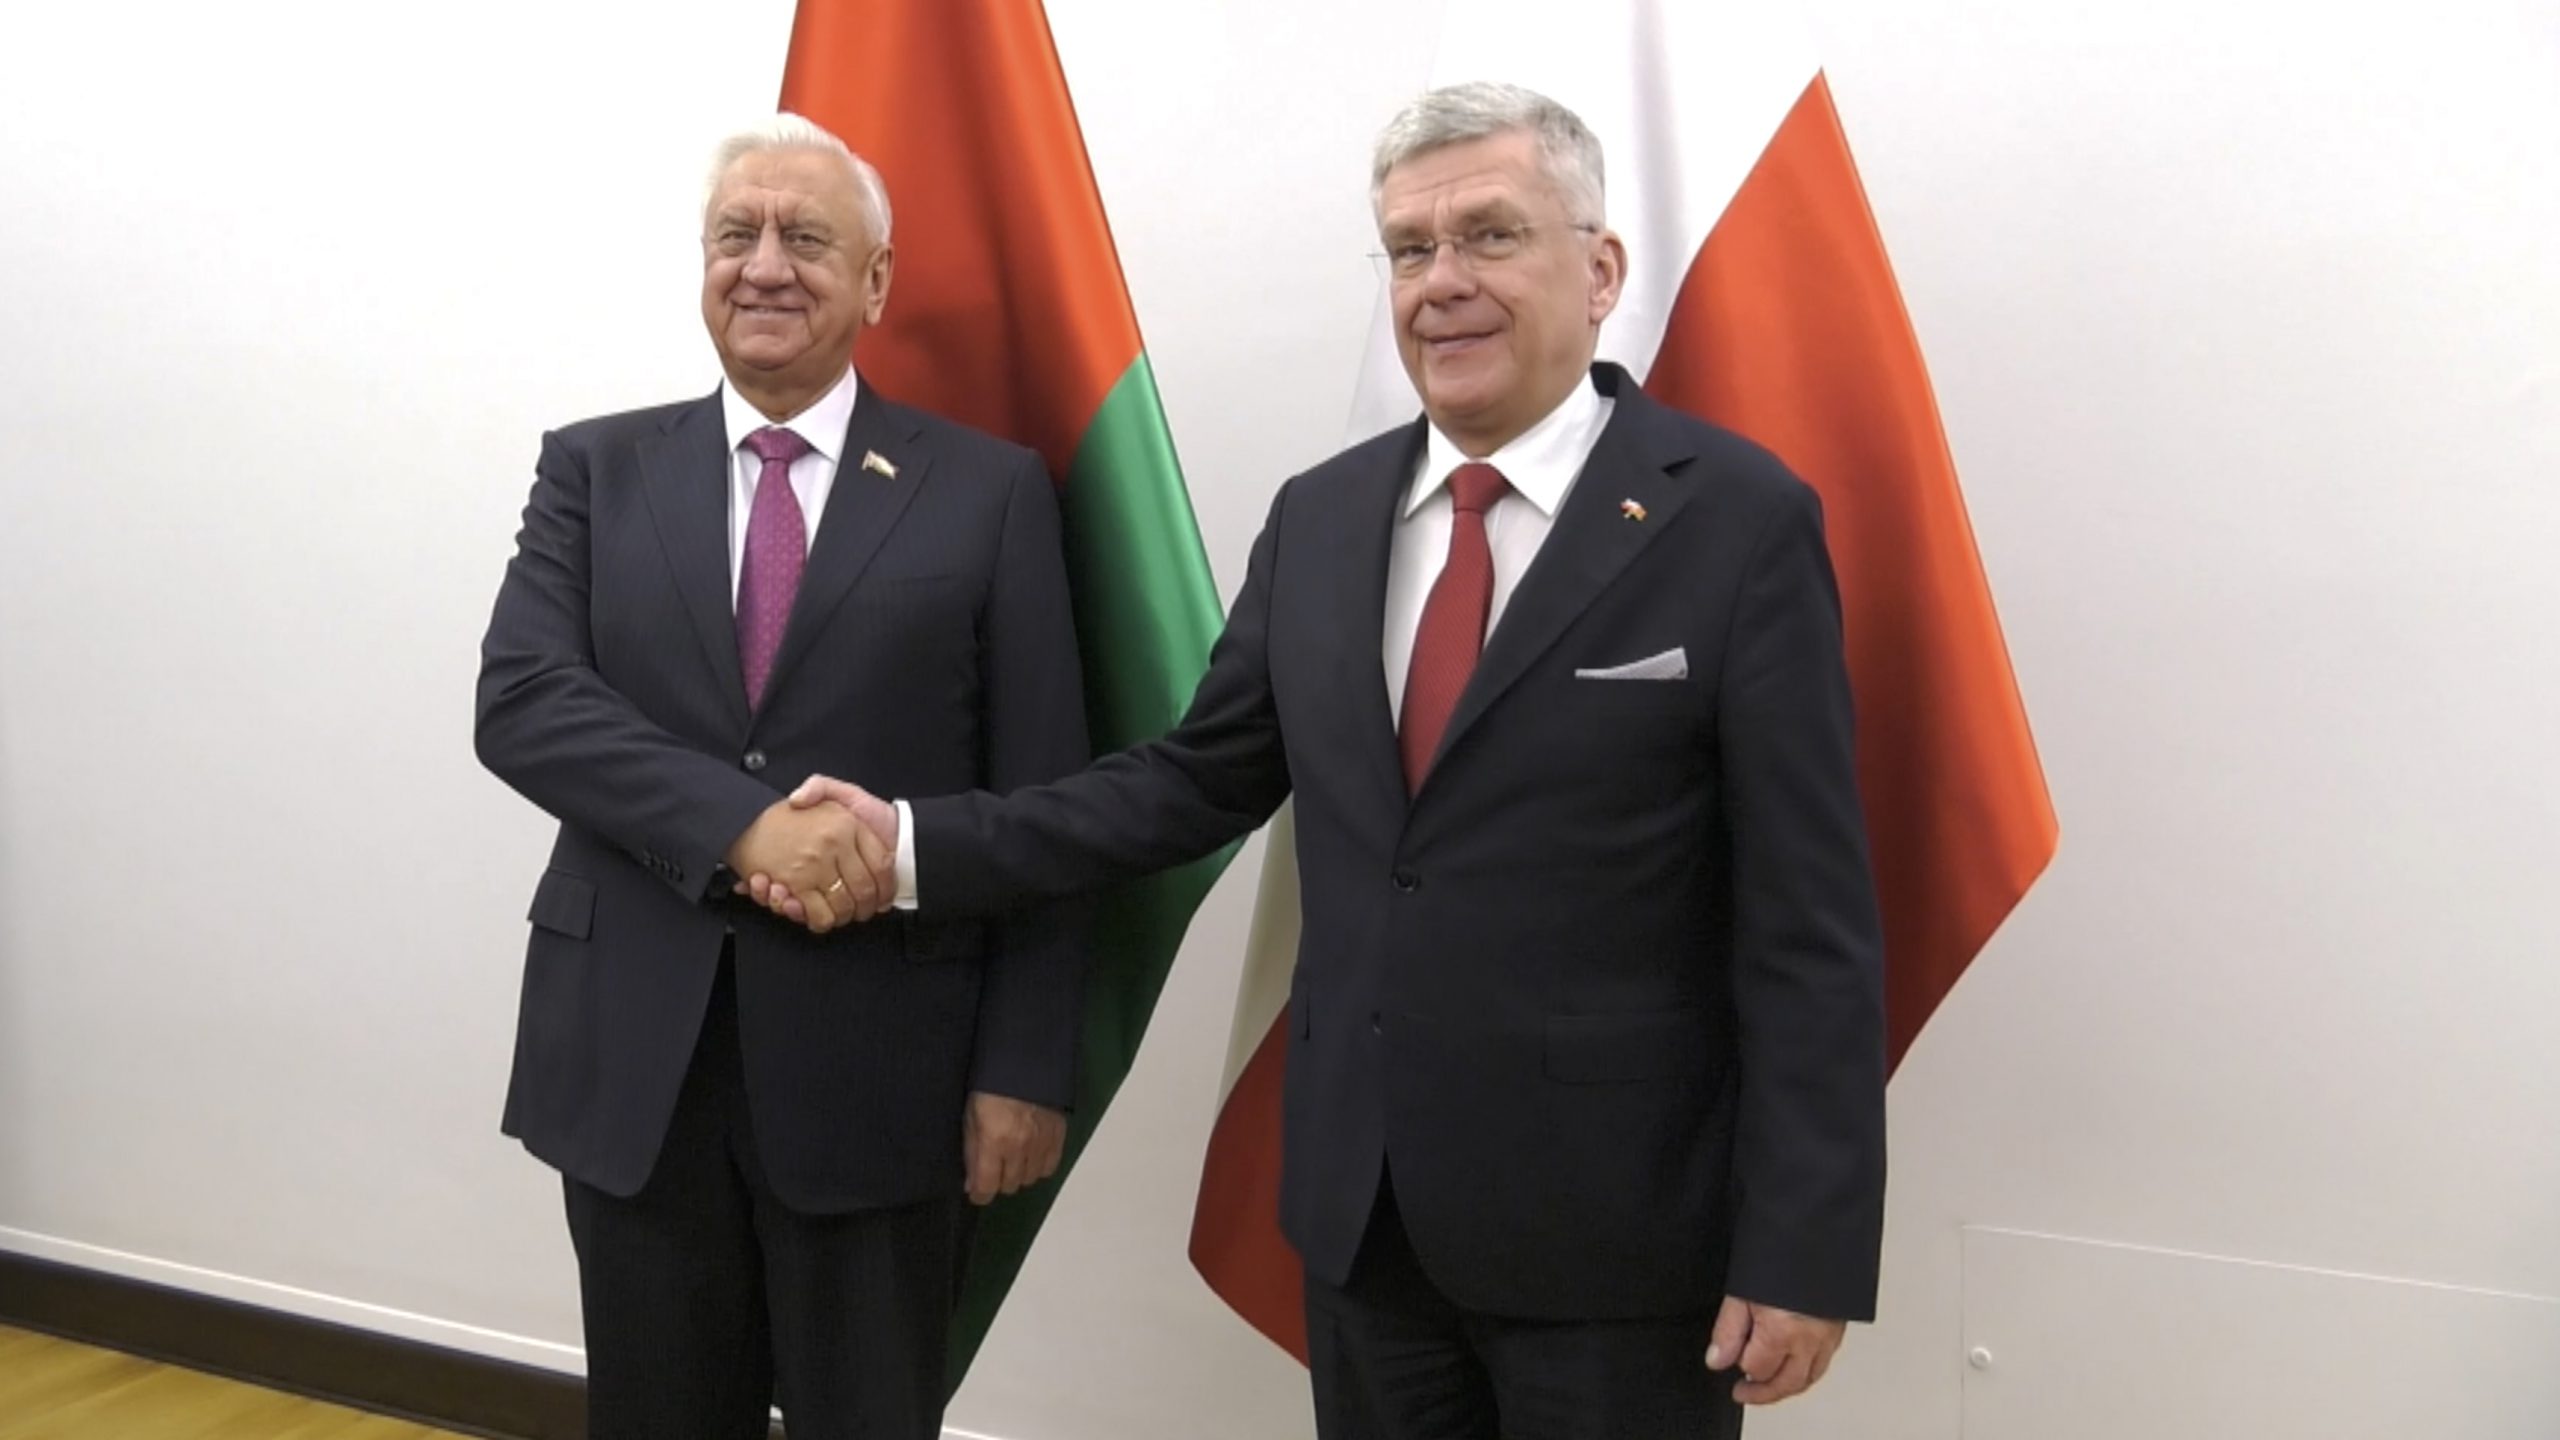 Myasnikovich’s visit to Poland may give a boost to Belarusian-European relations